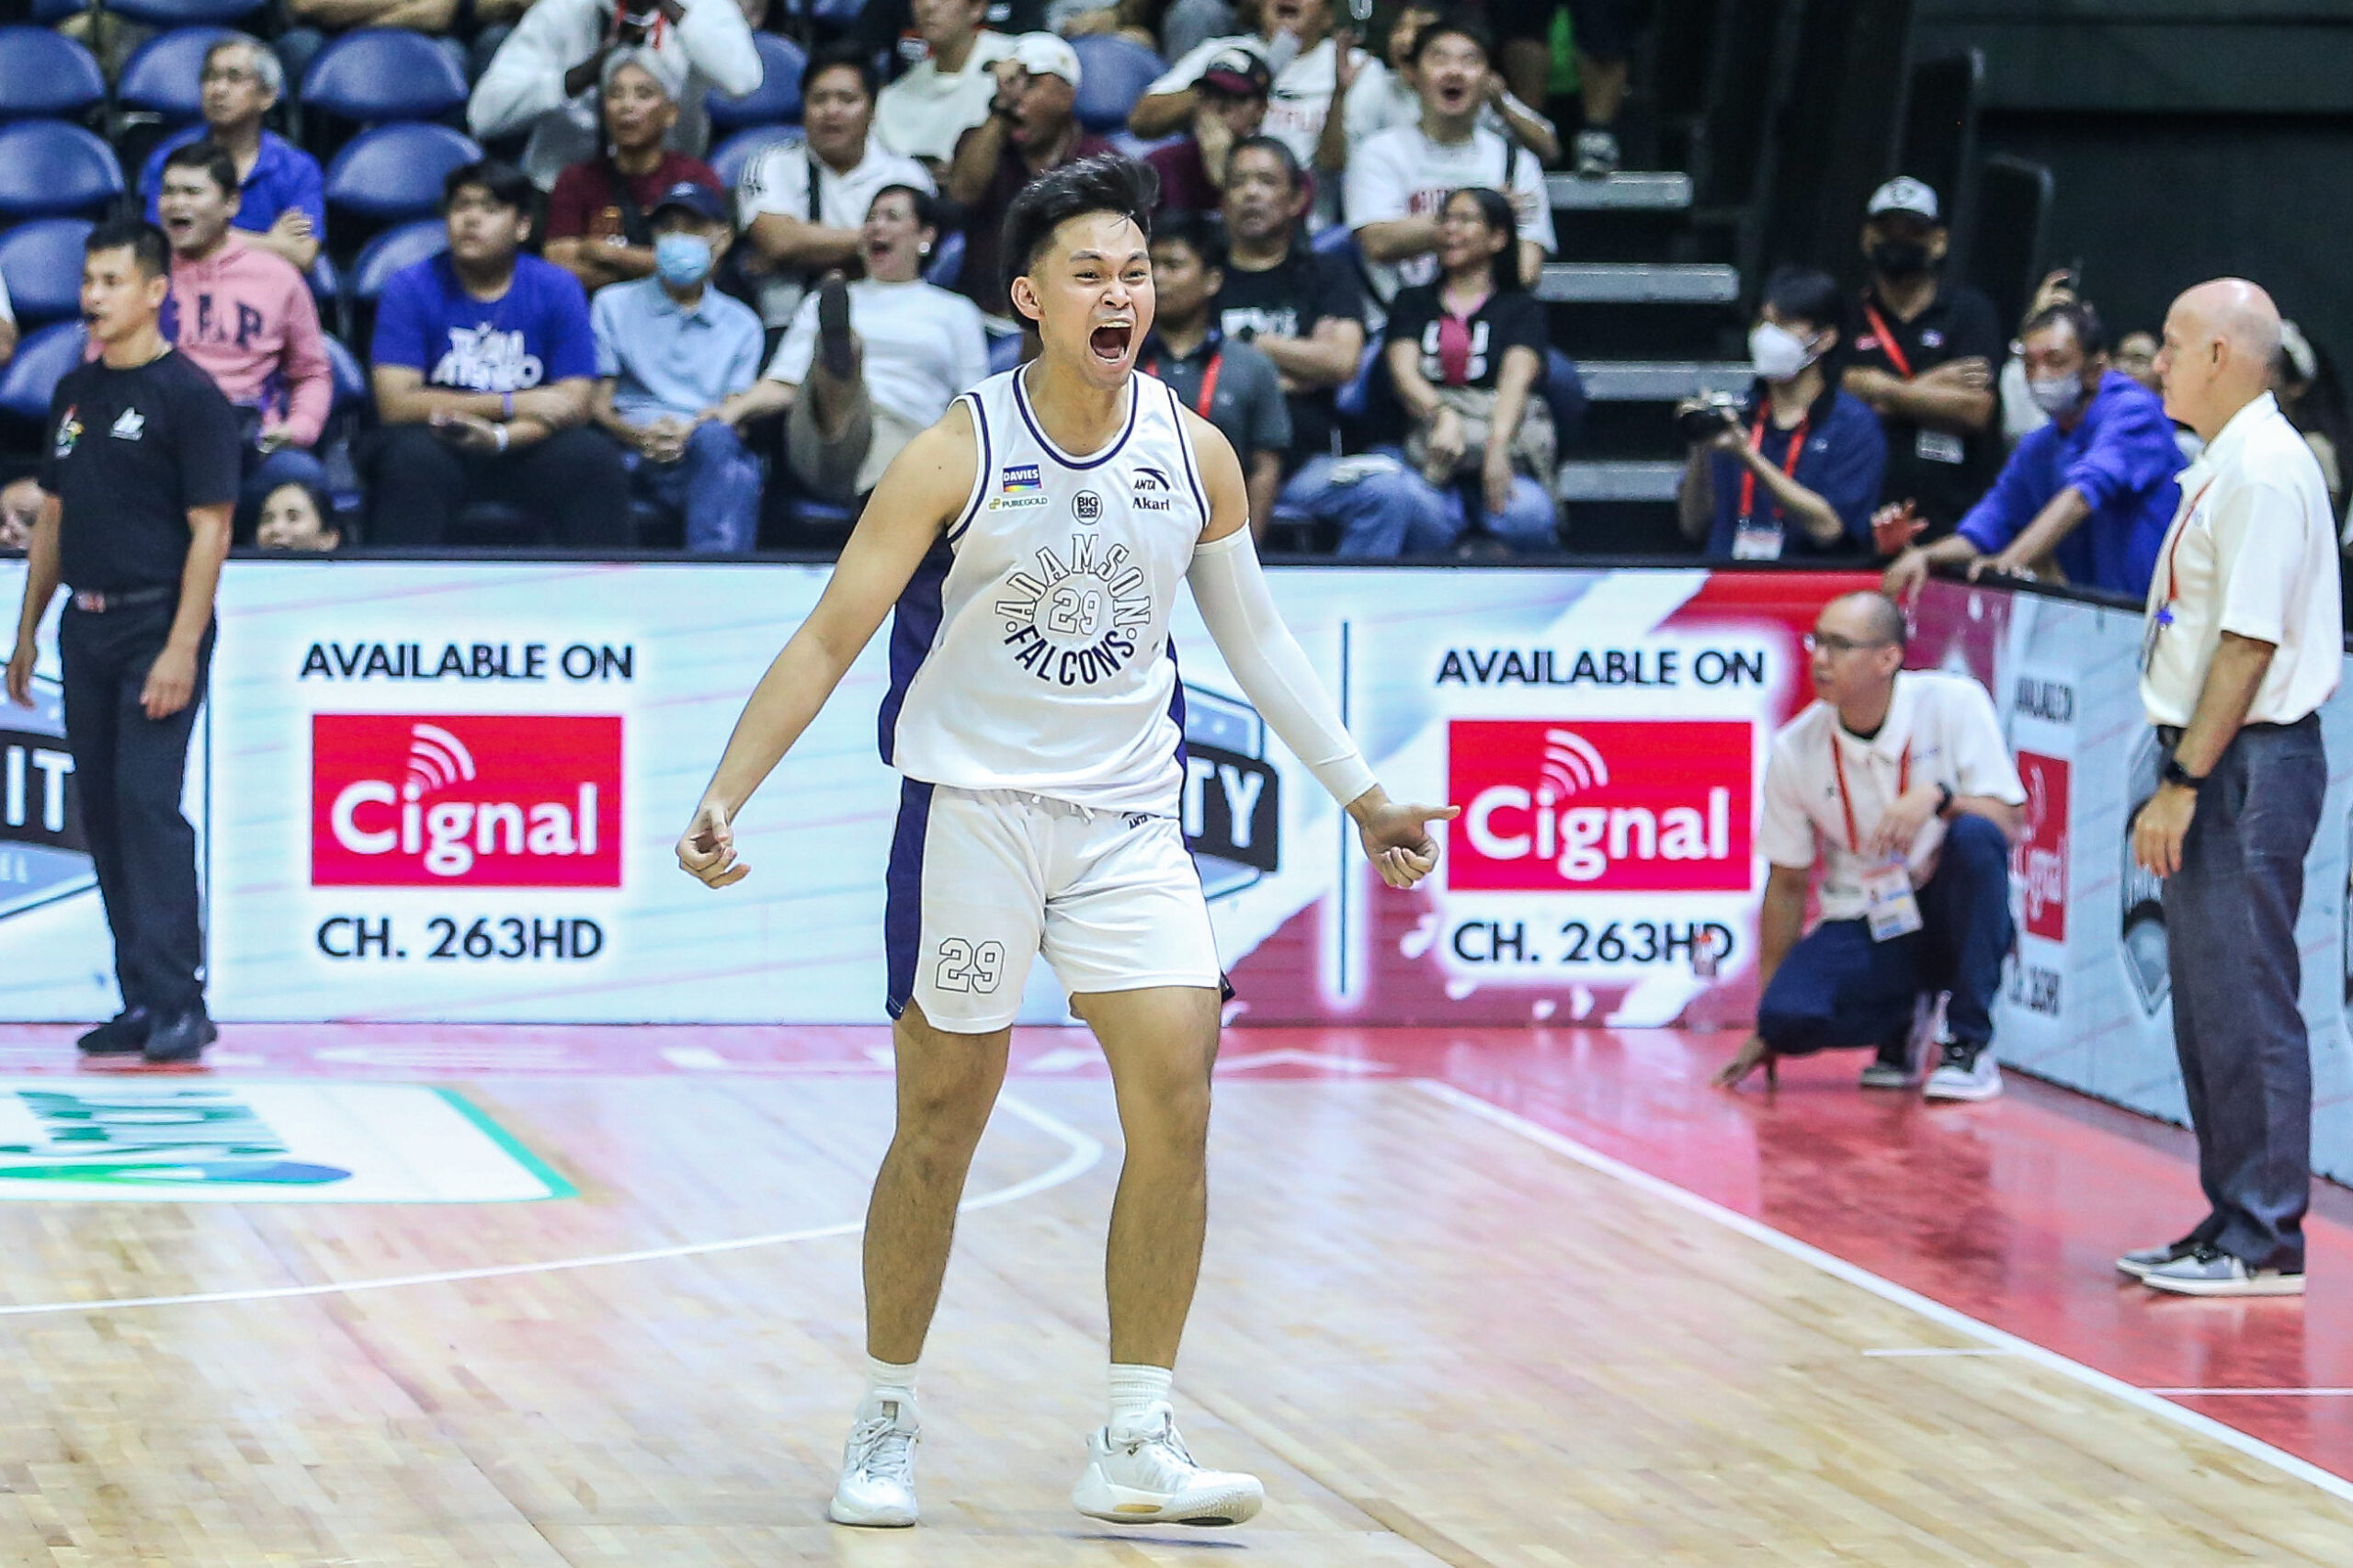 Adamson's Vince Magbuhos celebrates after squeaking past Ateneo on a buzzer-beating triple in overtime. 